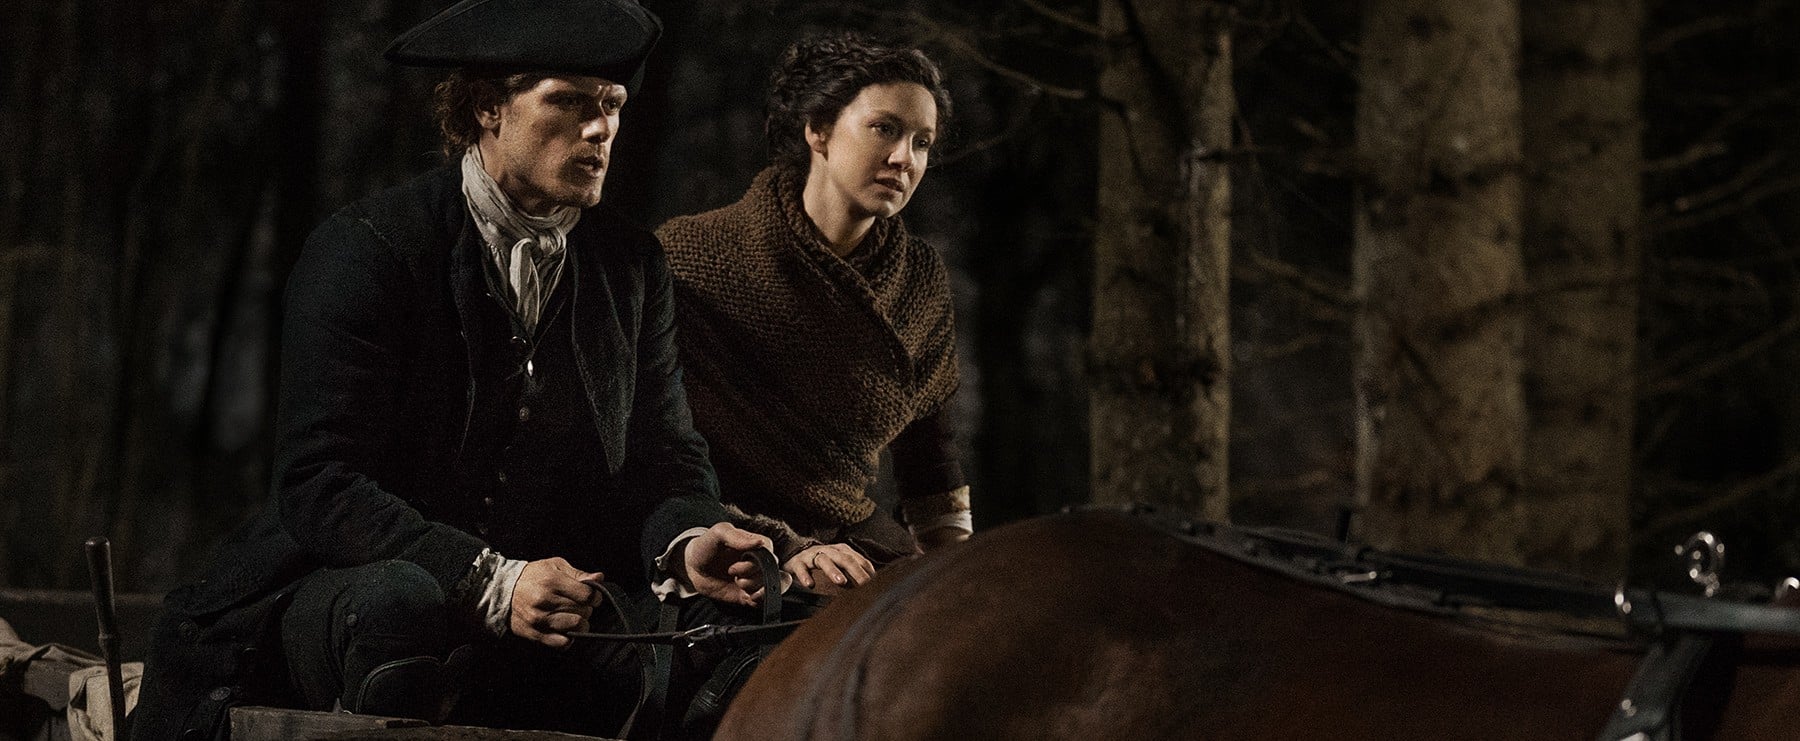 Outlander Homepage: Claire's Wedding Ring